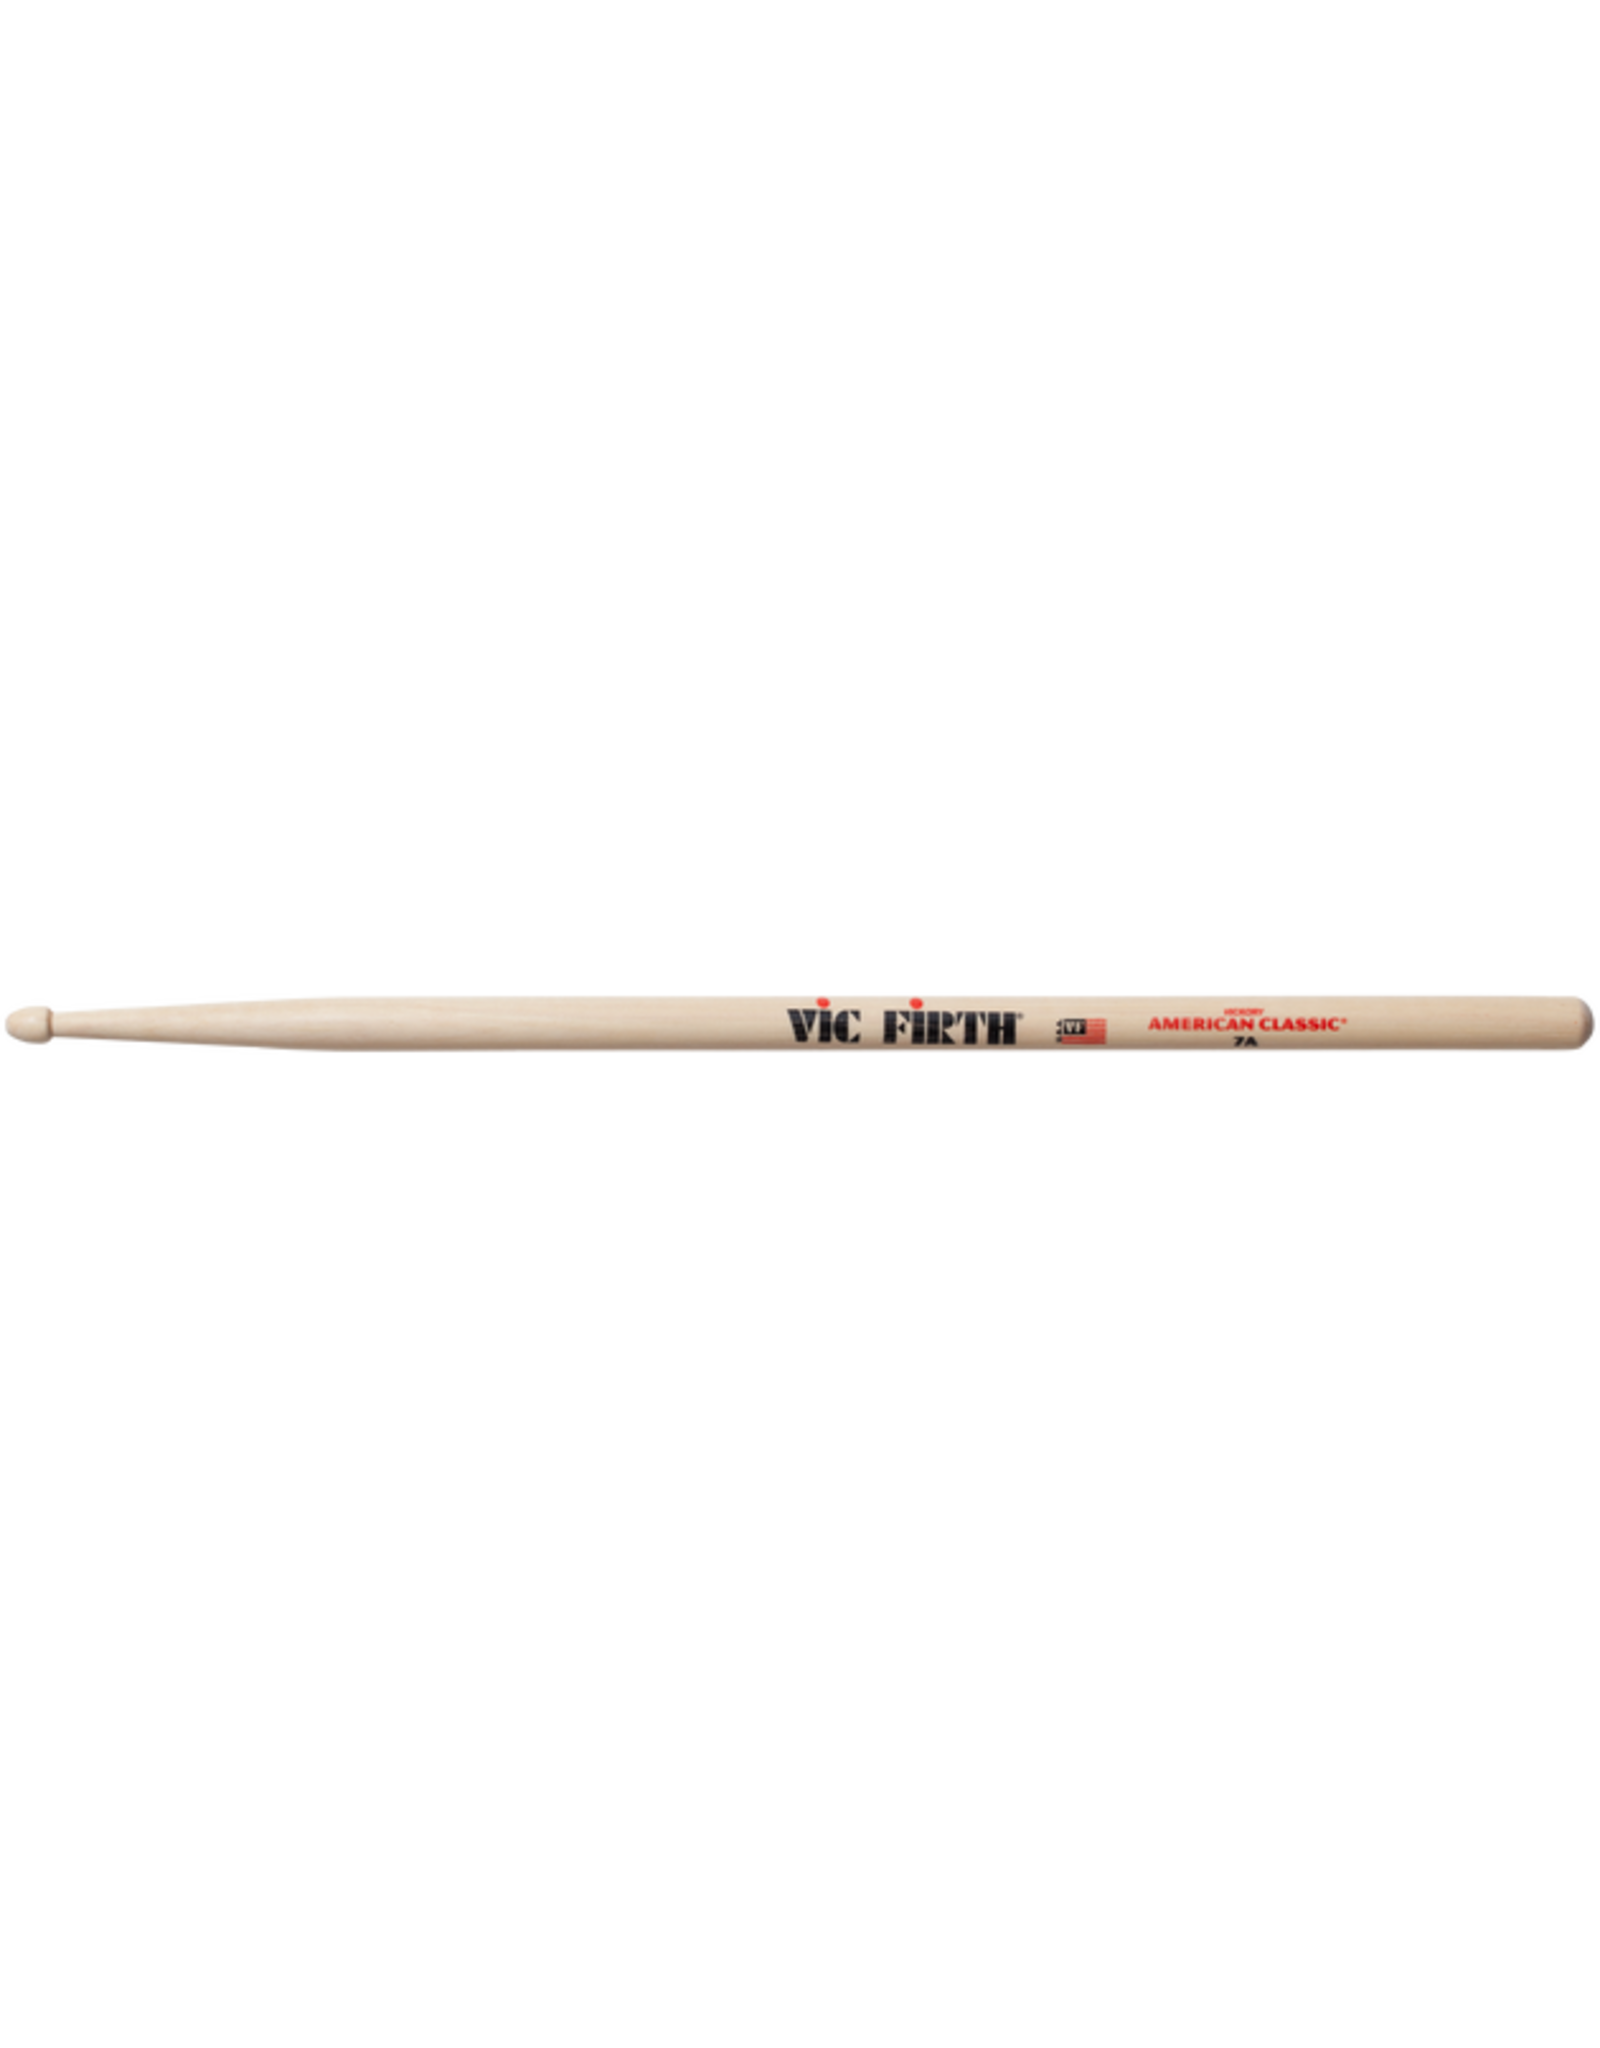 Vic Firth Vic Firth 7A American Classic Hickory Drumsticks